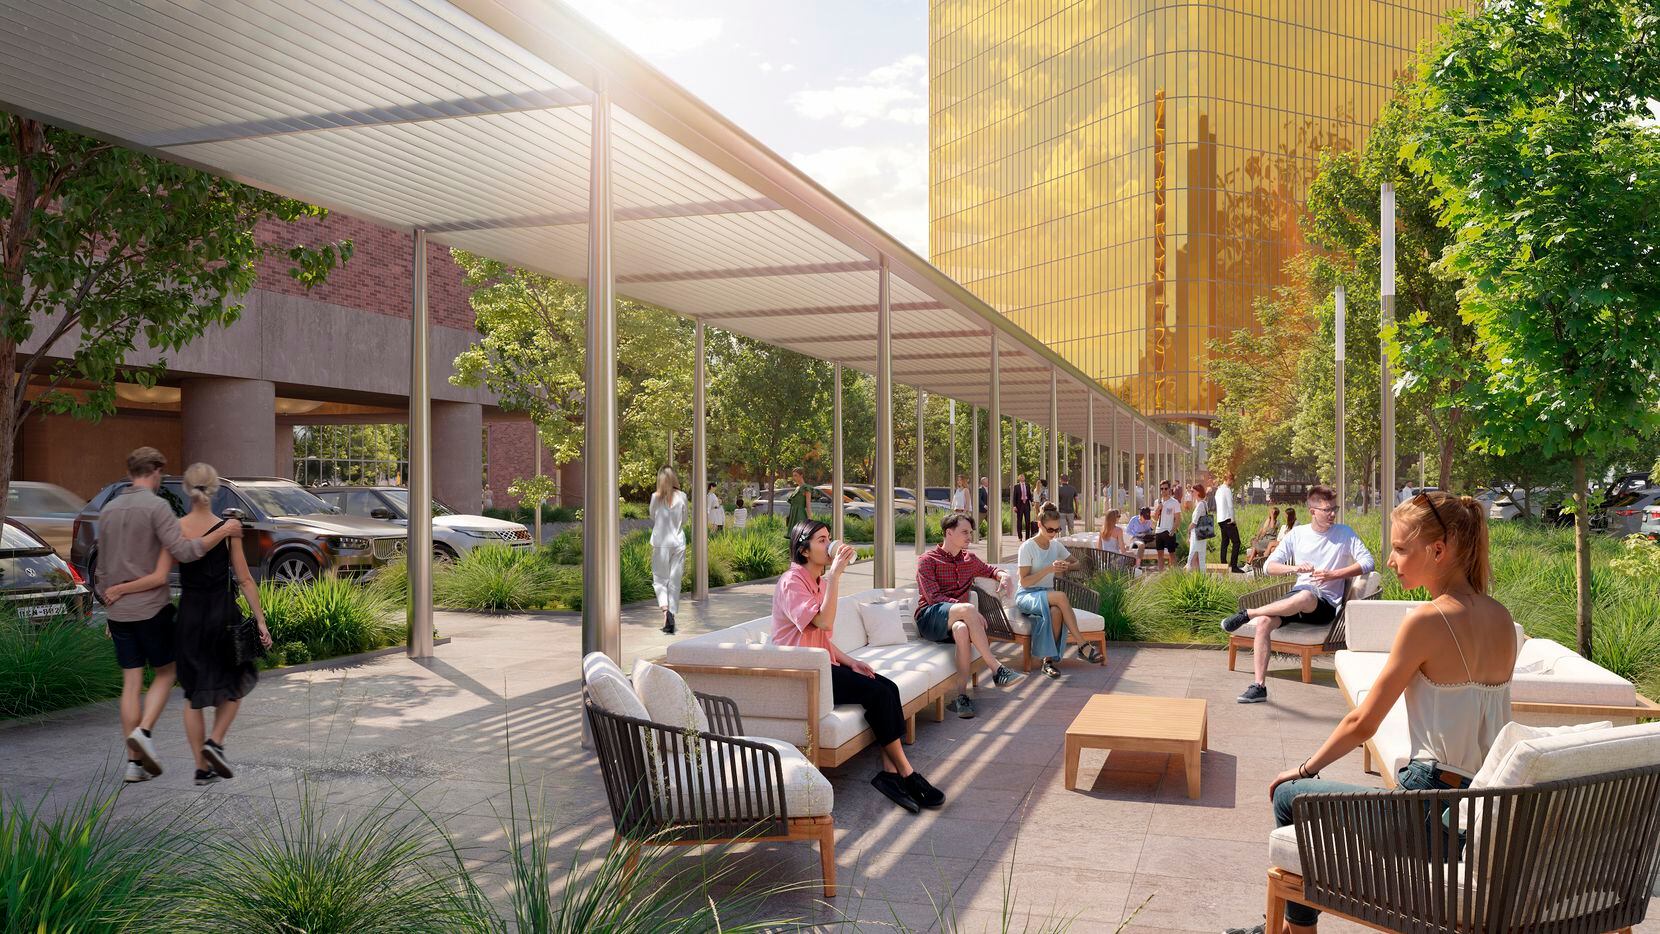 A landscaped promenade will connect the gold glass towers, which are being renamed The Gild.